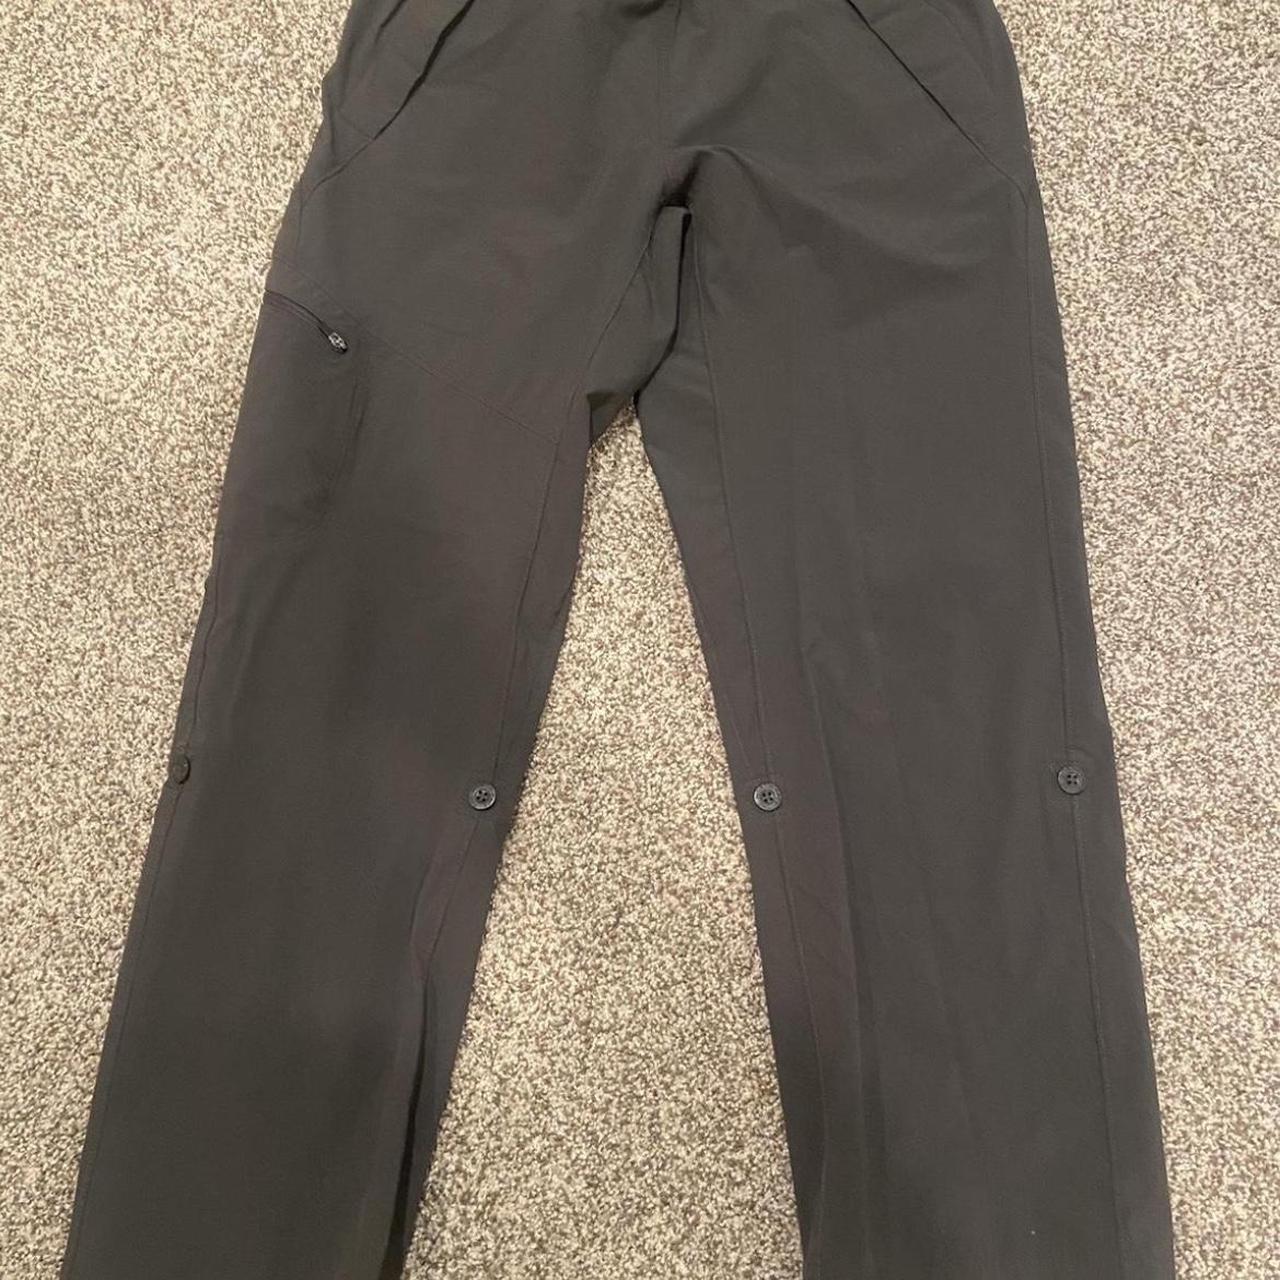 North face hiking pants / these have a really cool... - Depop